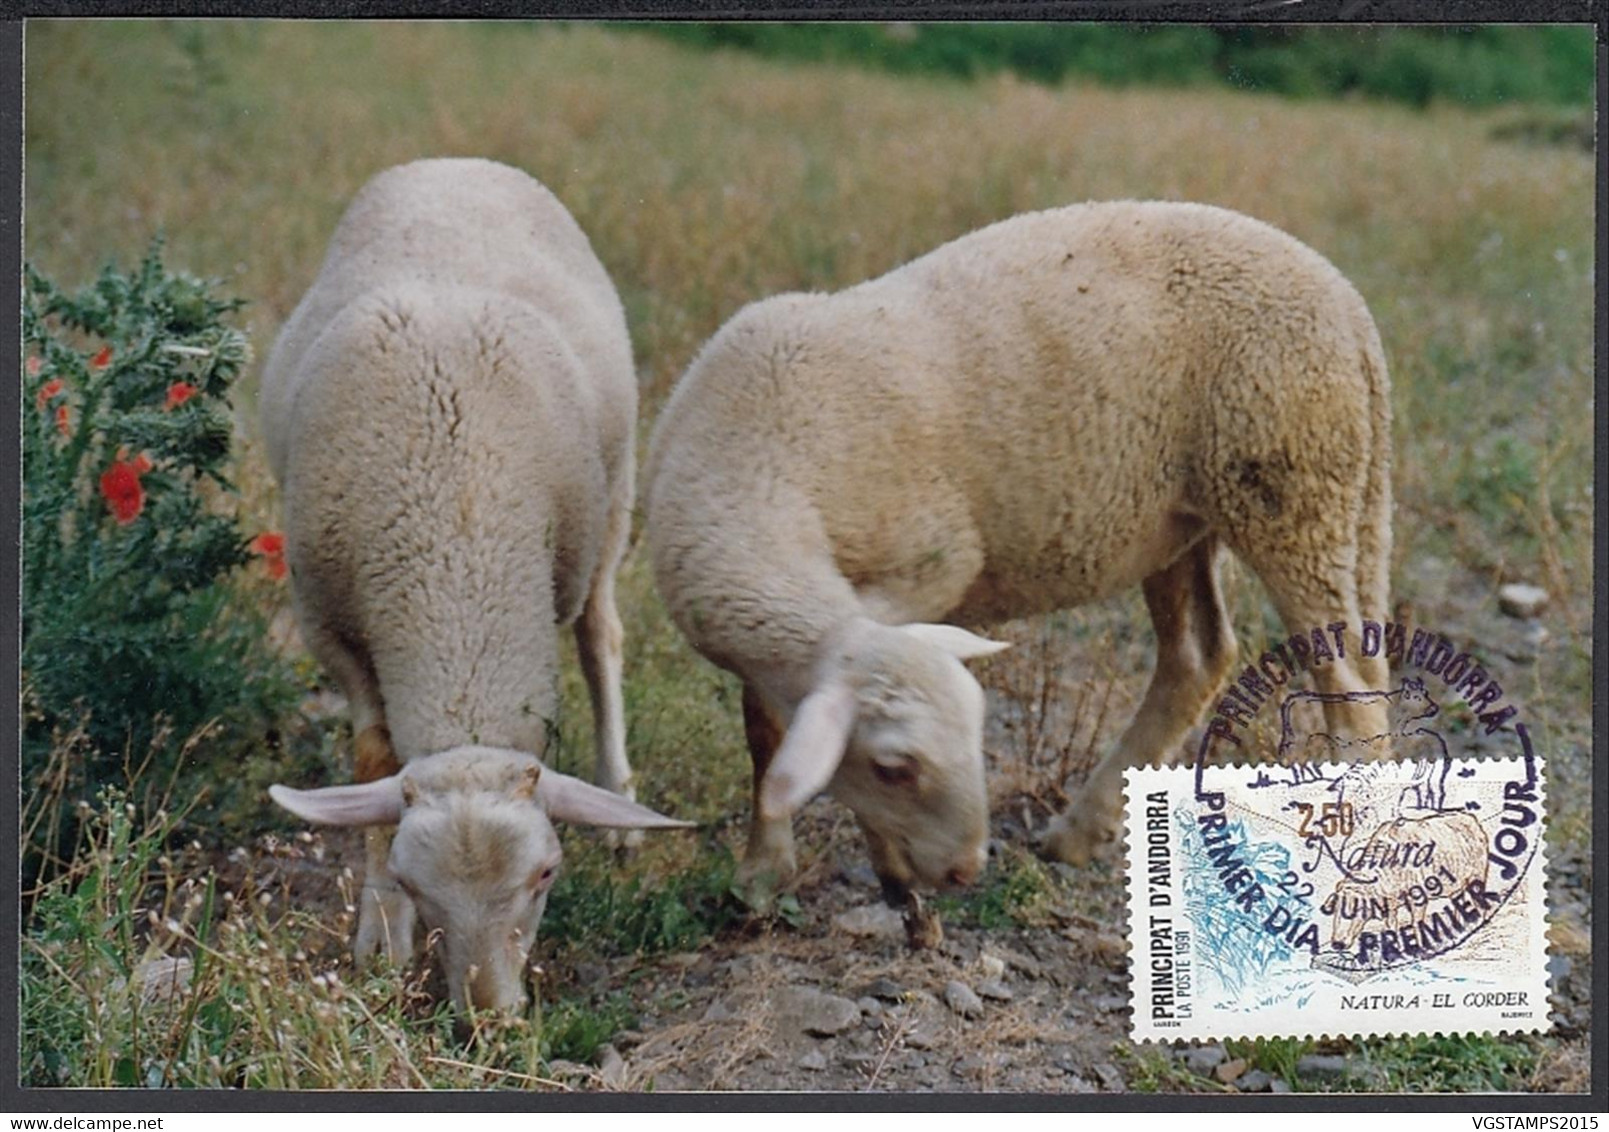 Andorre 1991-Andorre-Française- Yvert Nr.: 405 On Carte Maximum Photo. Theme: Mouton ........ (VG) DC-10240 - Used Stamps